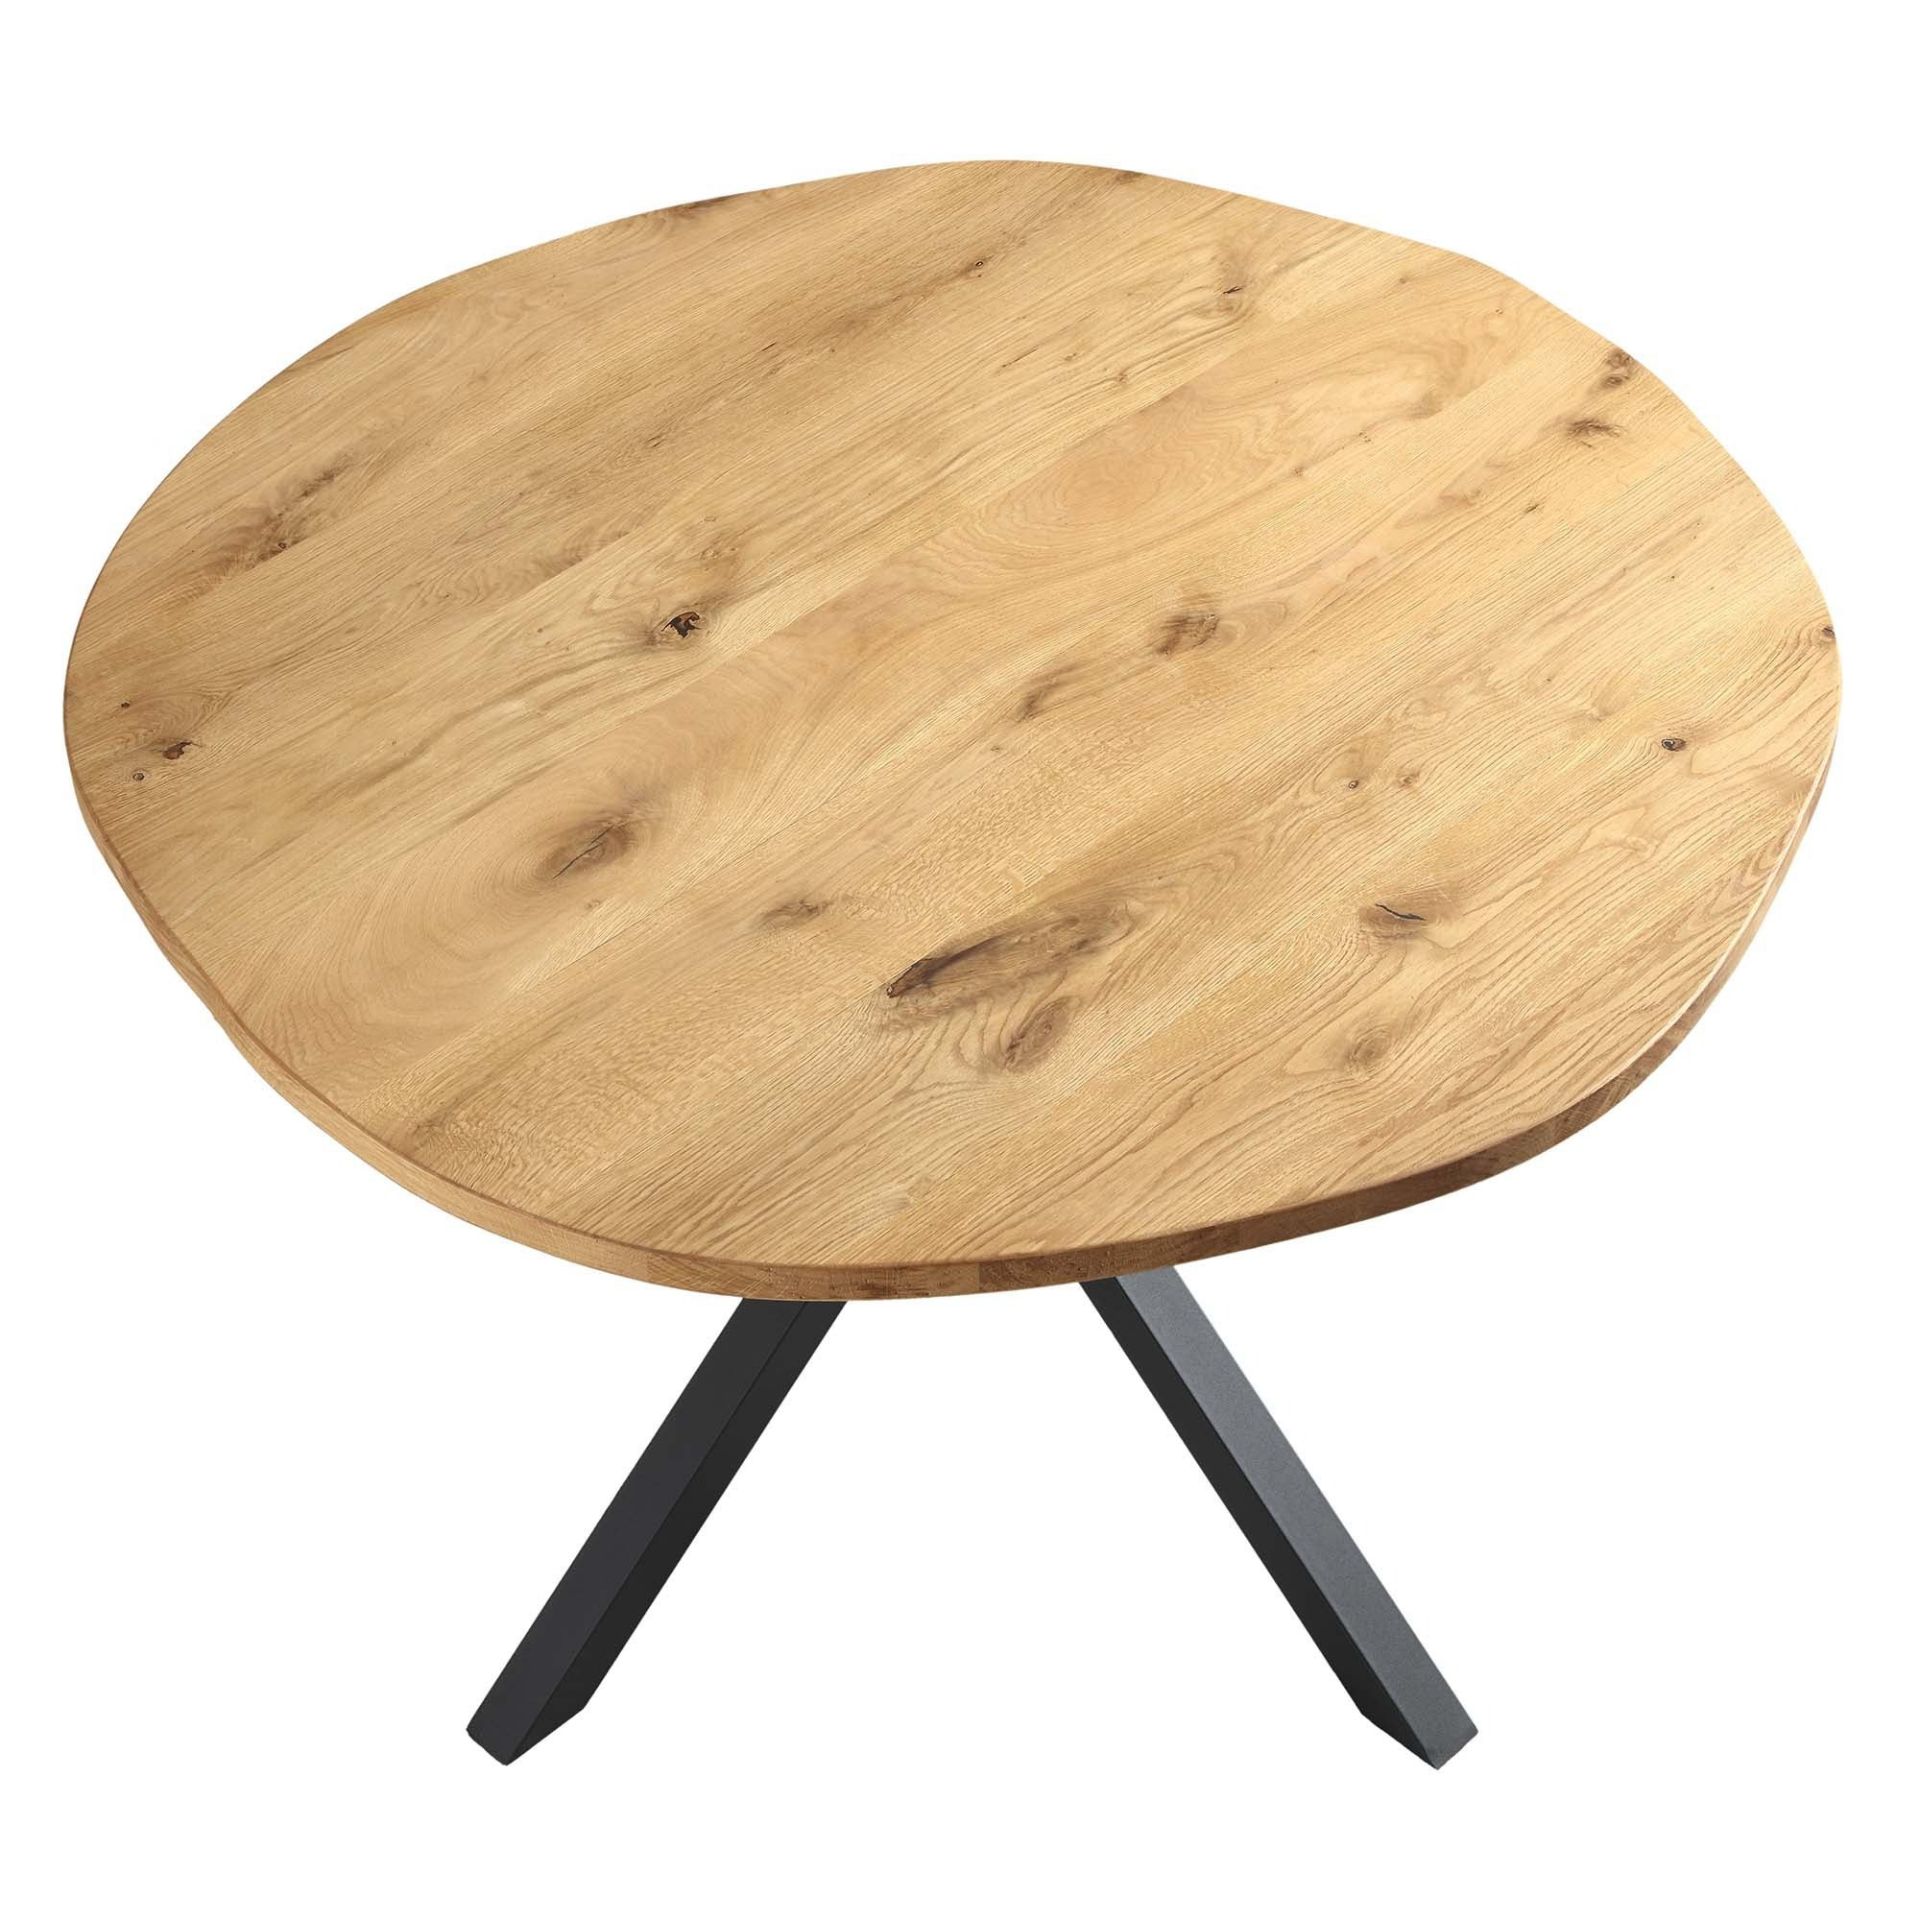 BERN Natural Curved Edge Solid Oak Dining Table - RRP £449.99 (LOCATION – R 14.4) Our Bern solid oak